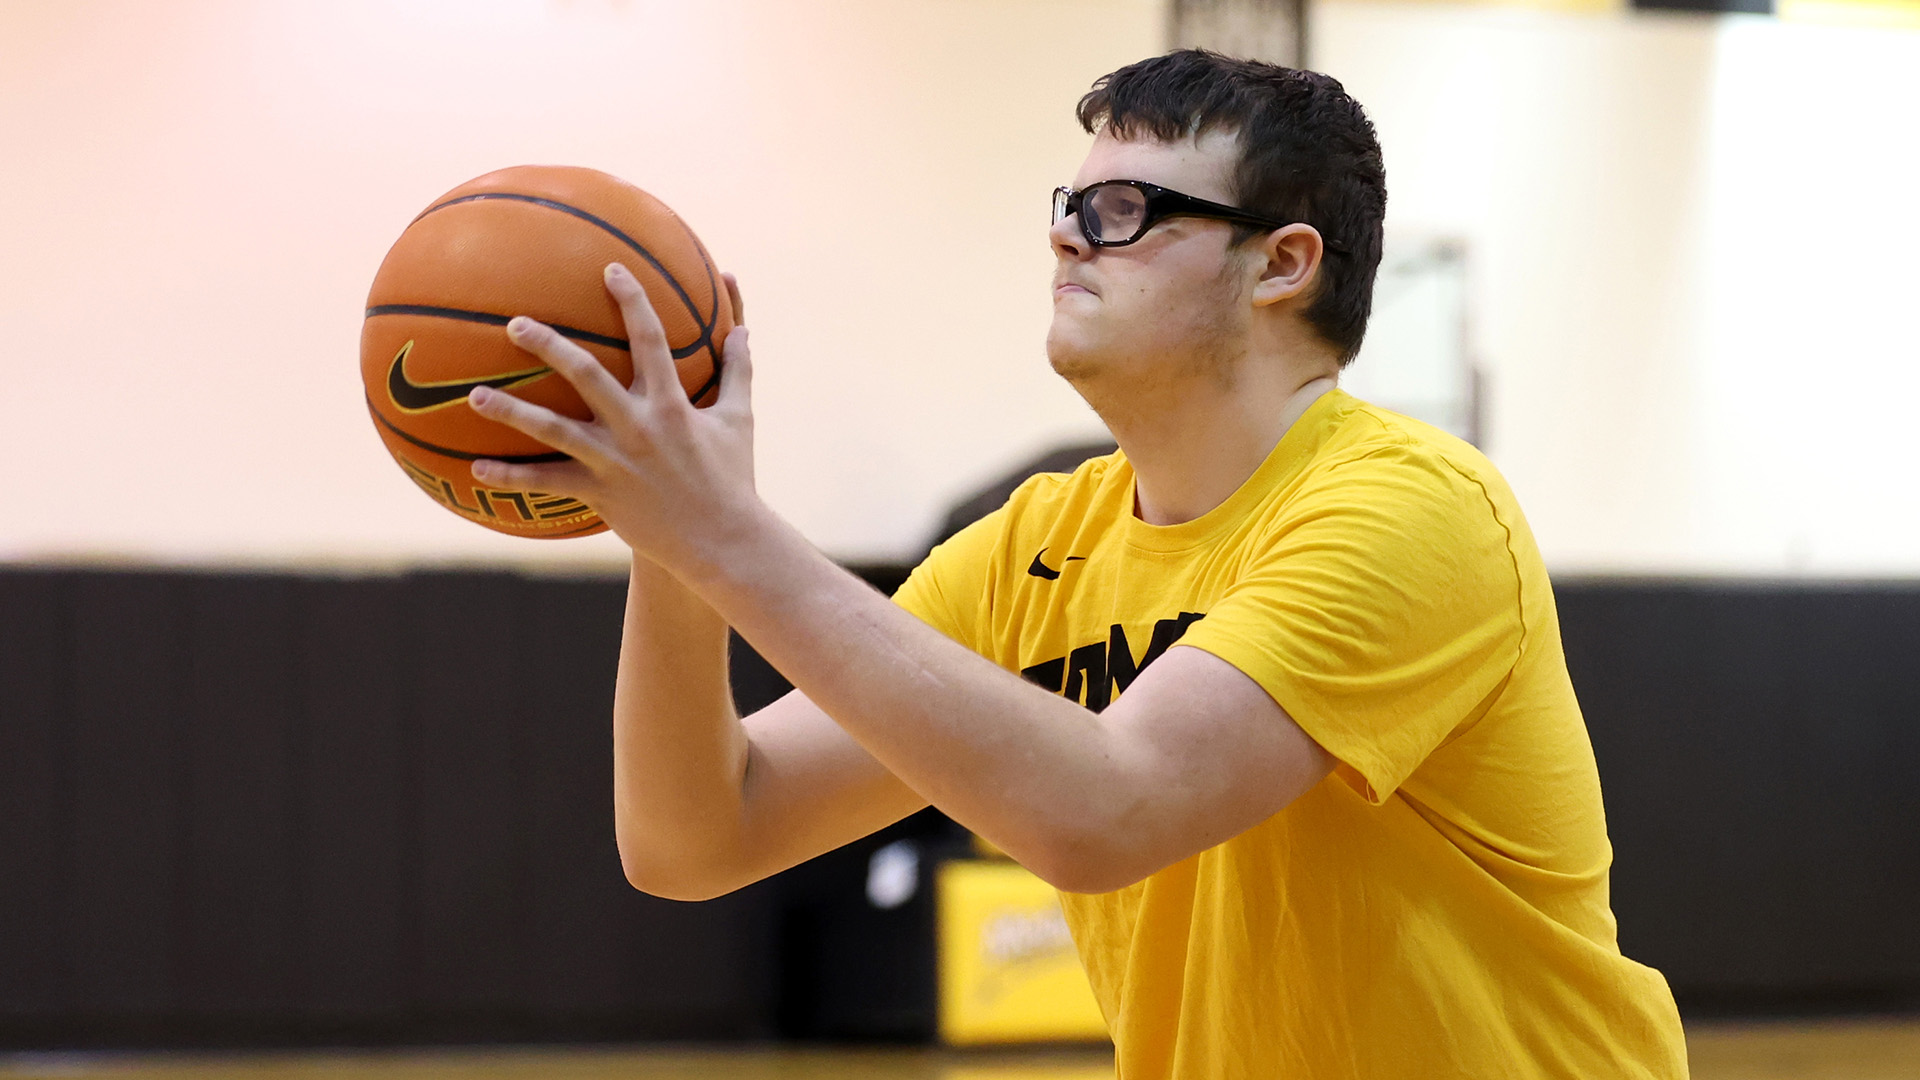 a young man taking a shot at basketball practice